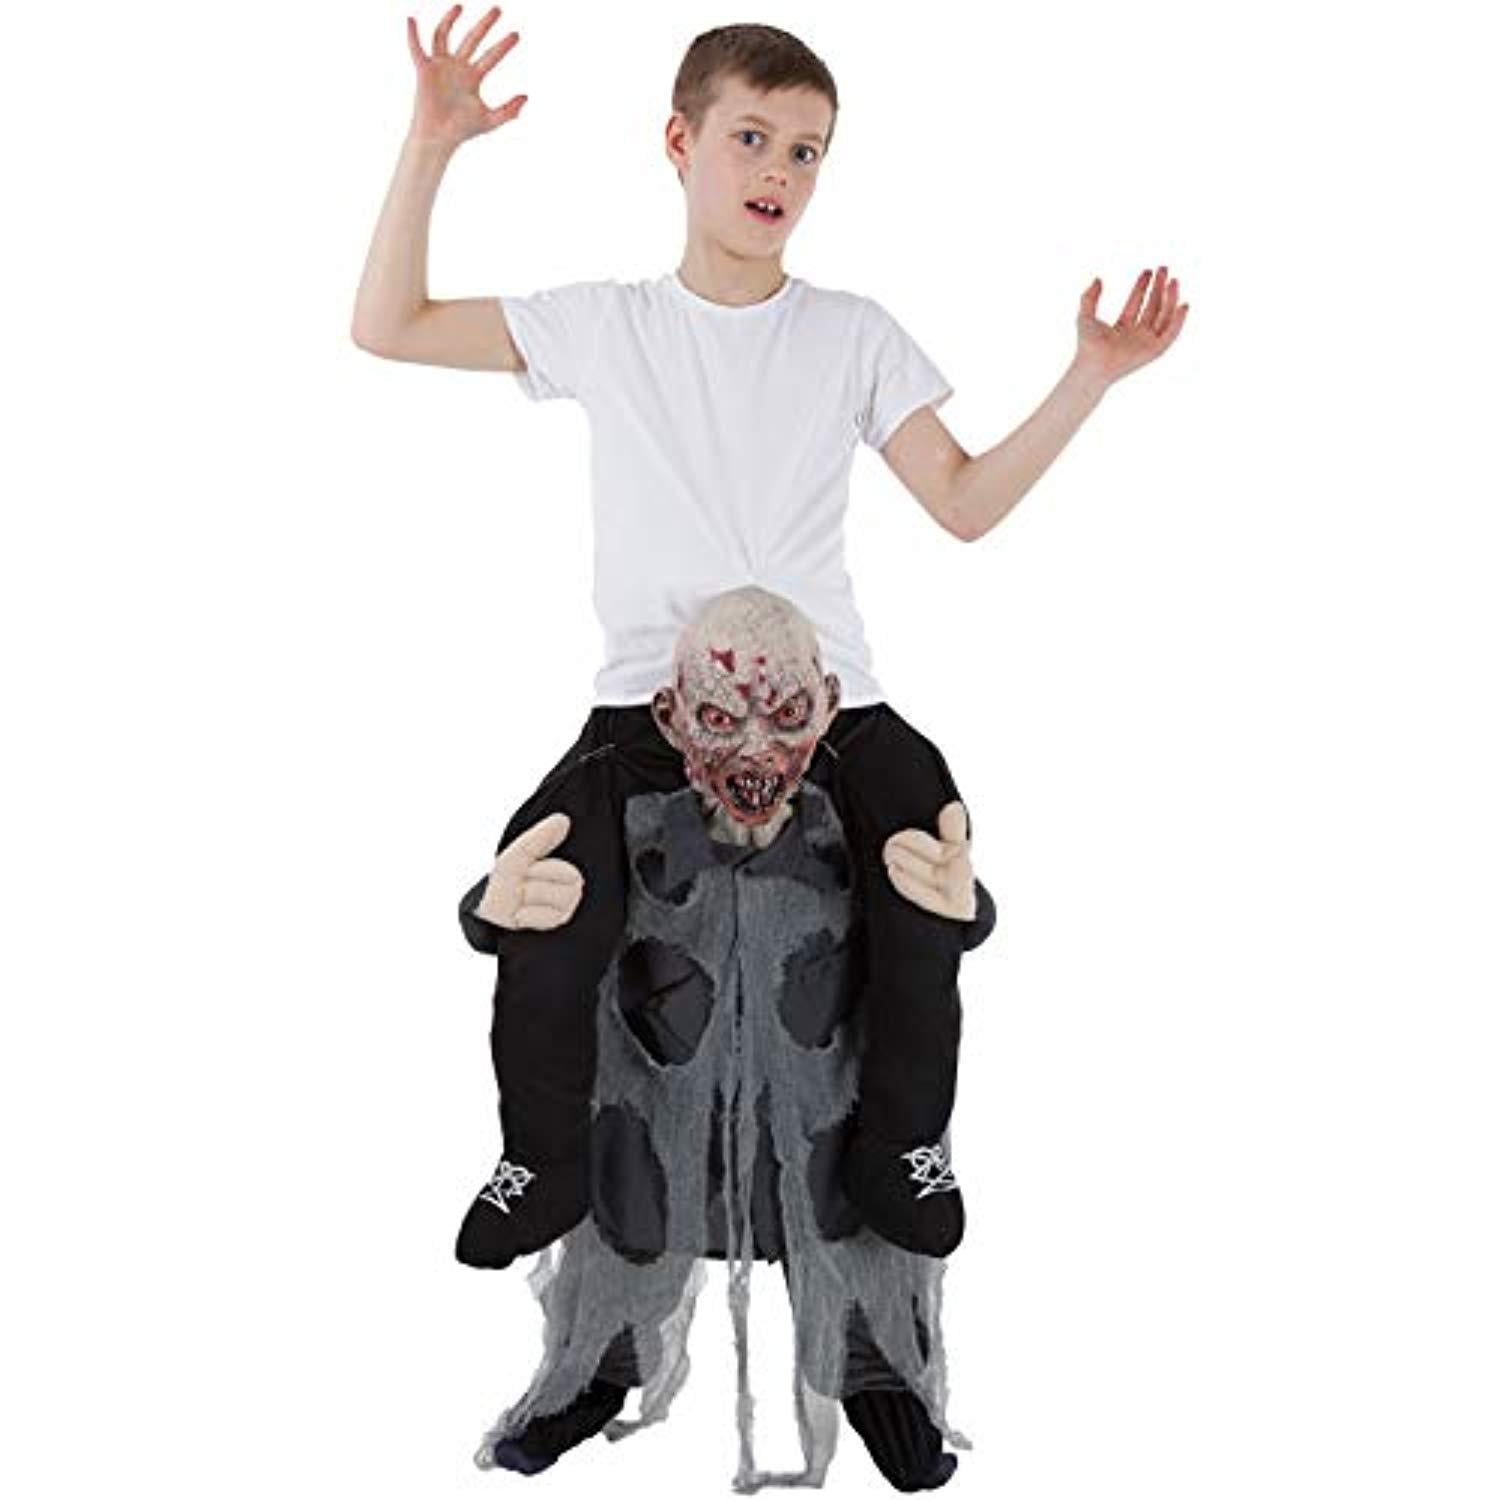 Kids Piggyback Costumes Funny Ride On Childs Illusion Carry Me Fancy Dress  Up 